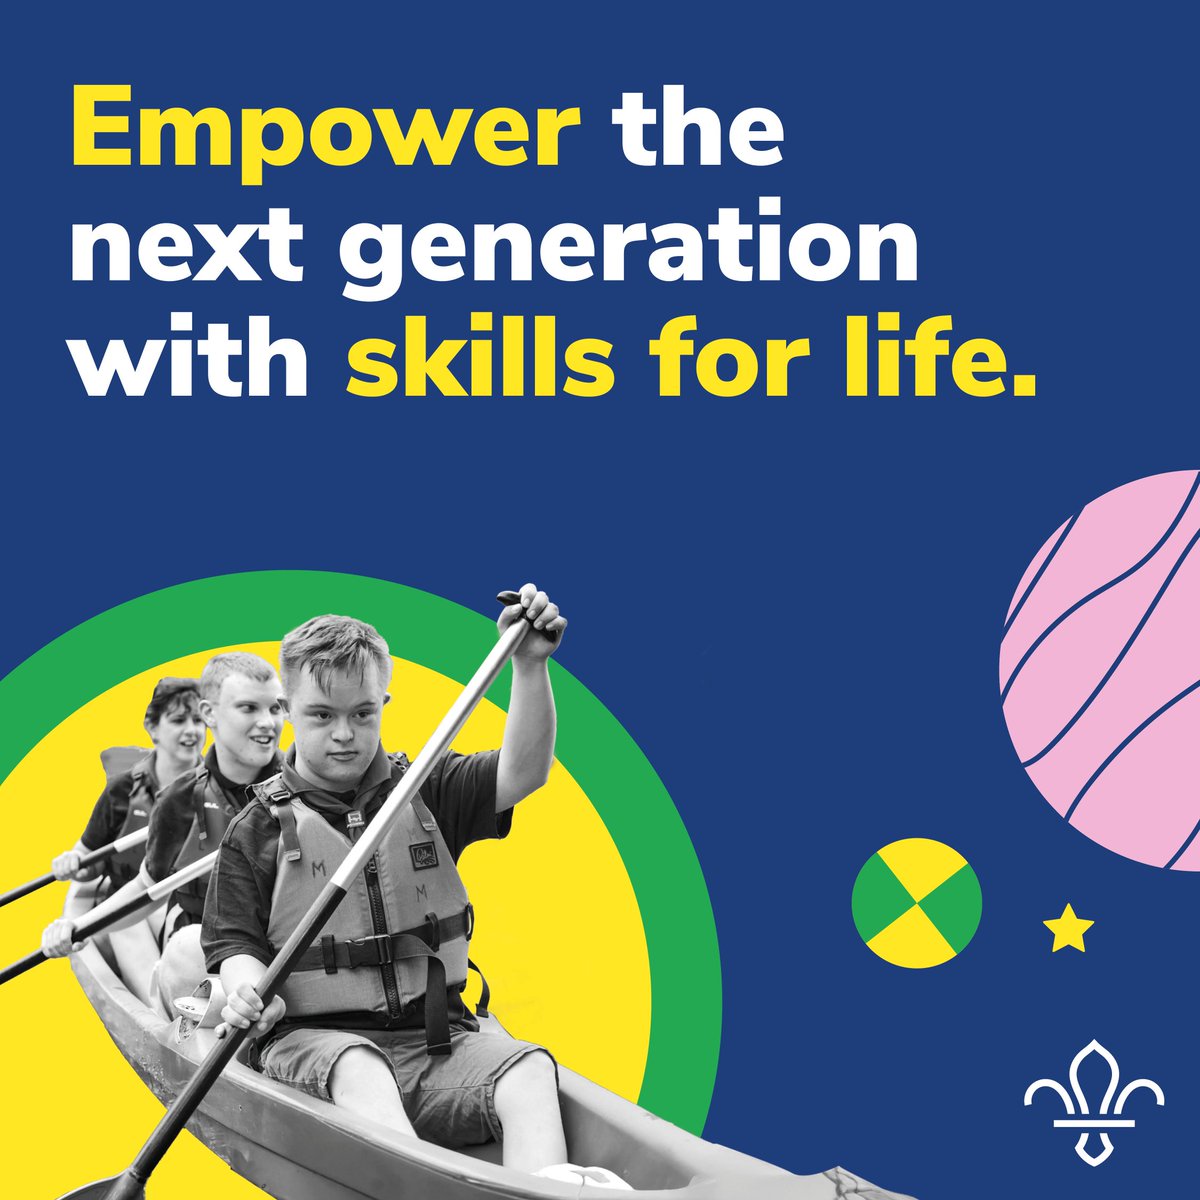 As a @Scouts Youth Advocate, I'm pushing for nationwide government support for young people and volunteers. With 100,000+ young people waiting for extracurricular activities, urgent action is crucial. #BuildingBrighterTomorrows Read our manifesto: Scouts.org.uk/Manifesto